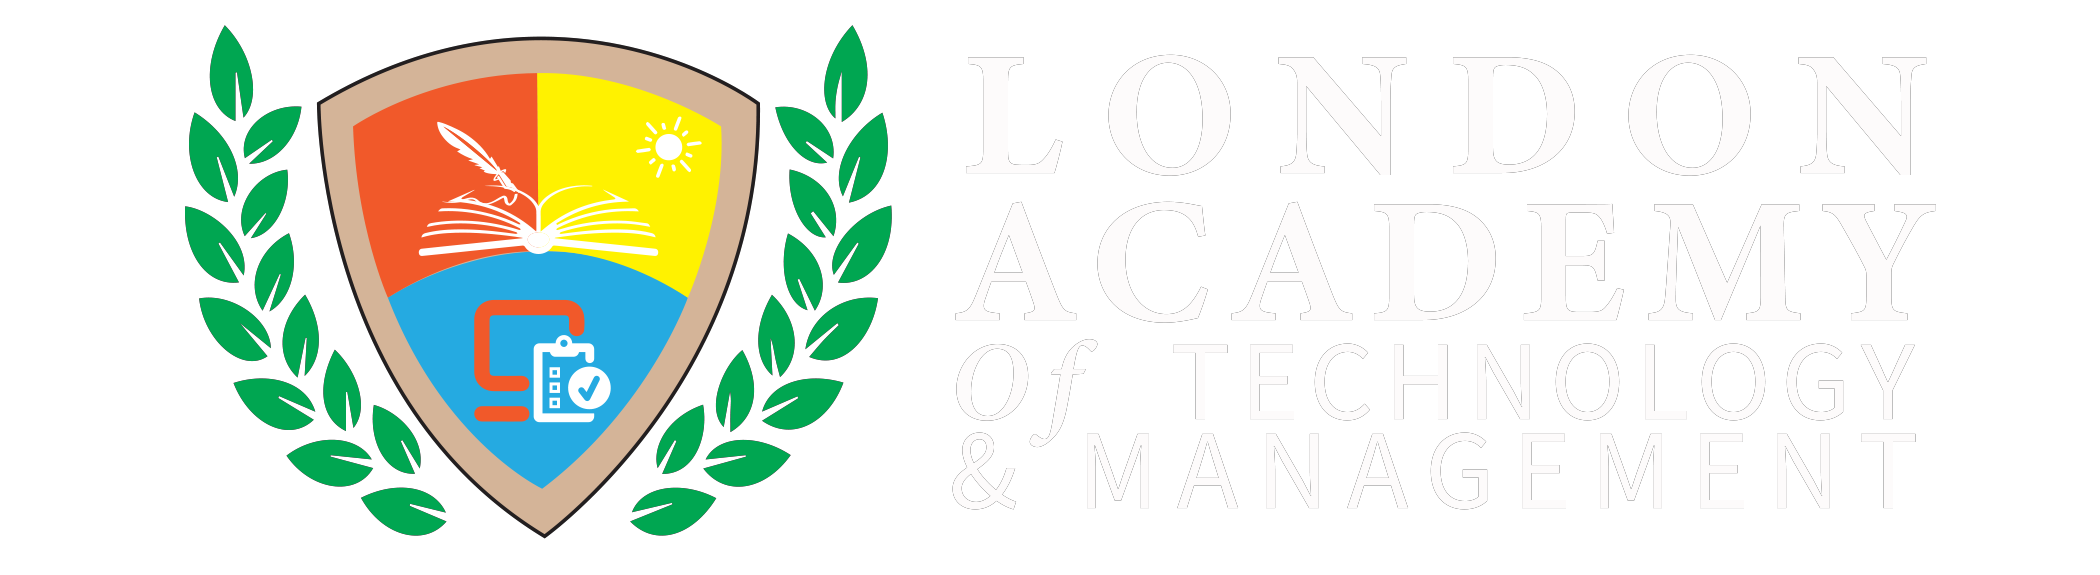 London Academy of Technology and Management